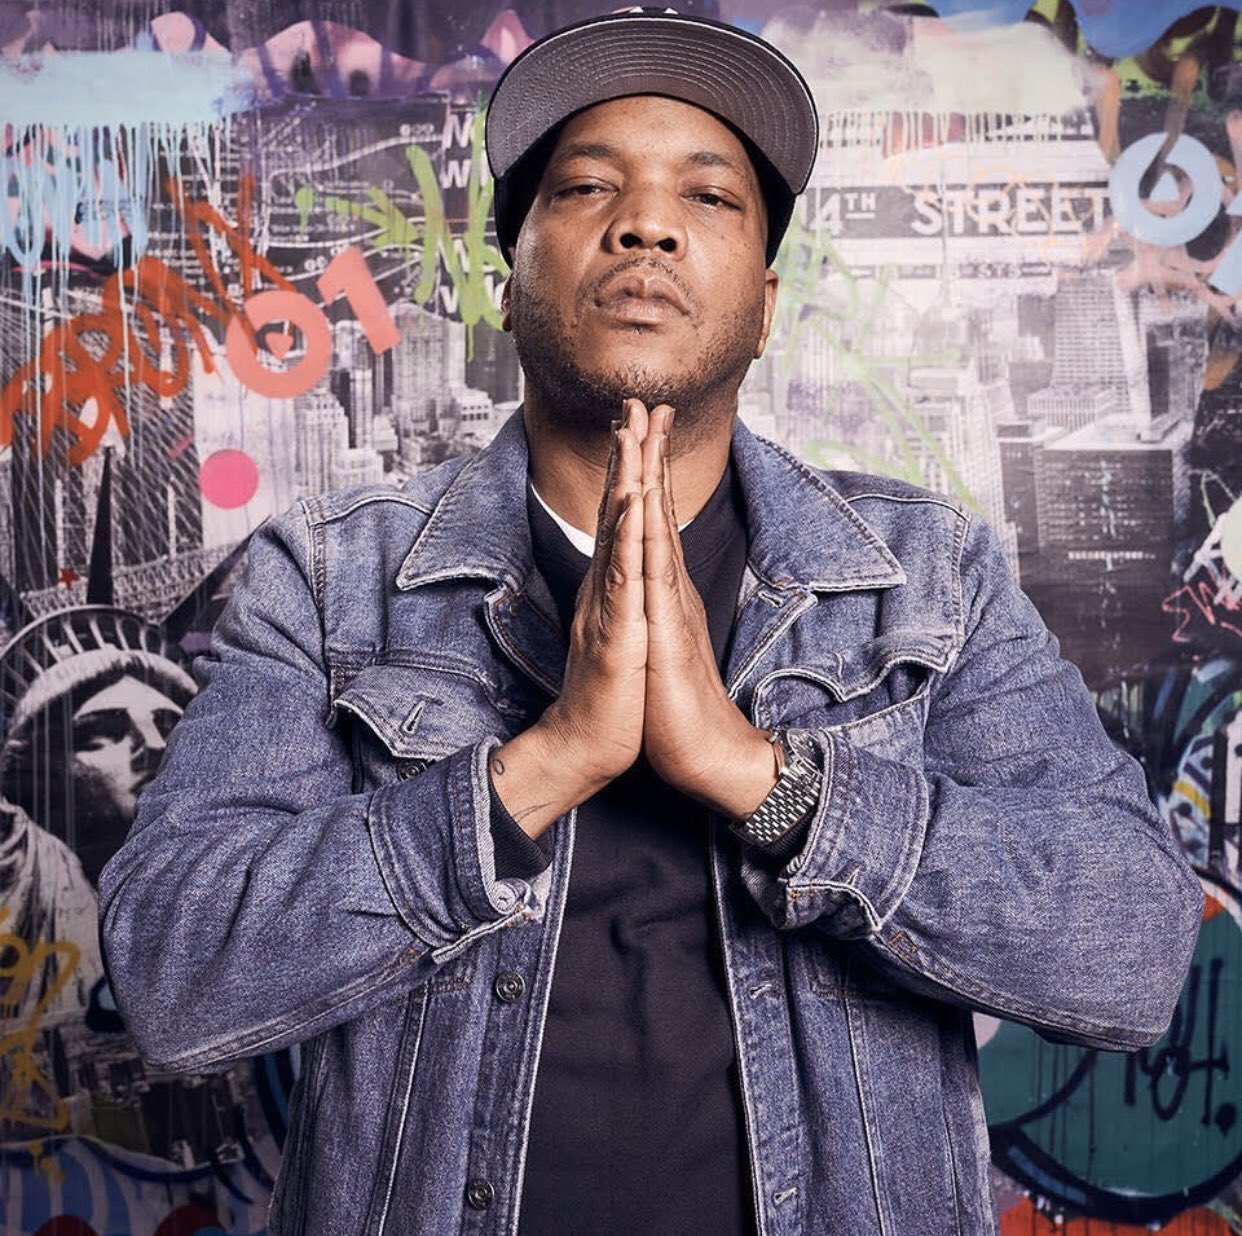 Happy Birthday to the Ghost  what s your favorite track from Styles P? 